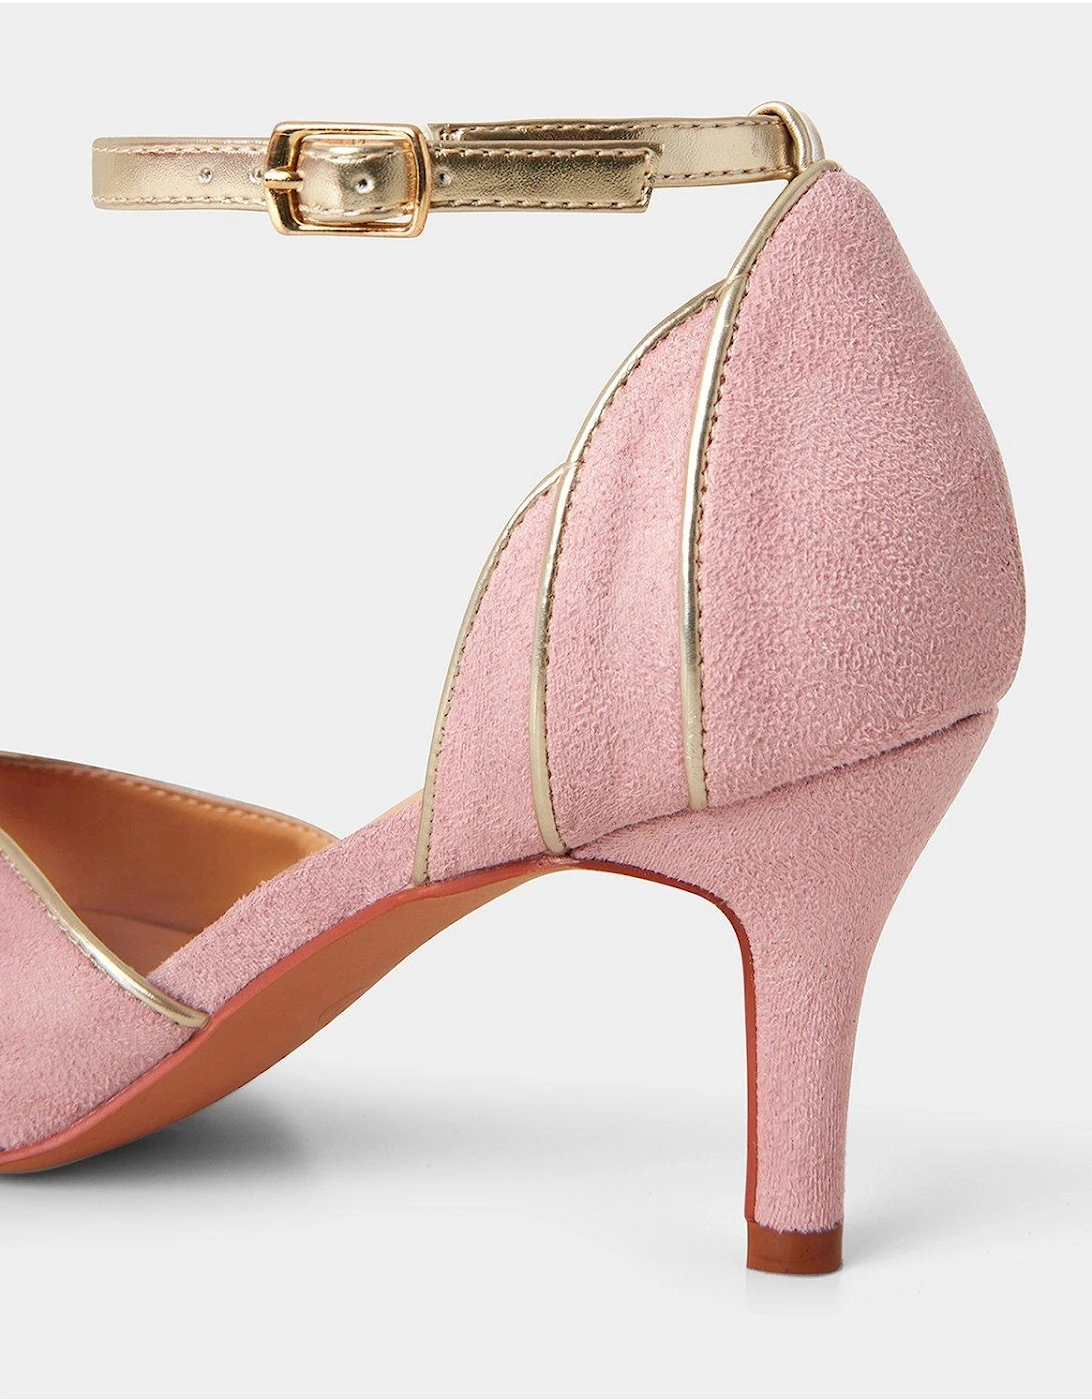 Art Deco Occasion Shoes - Pink